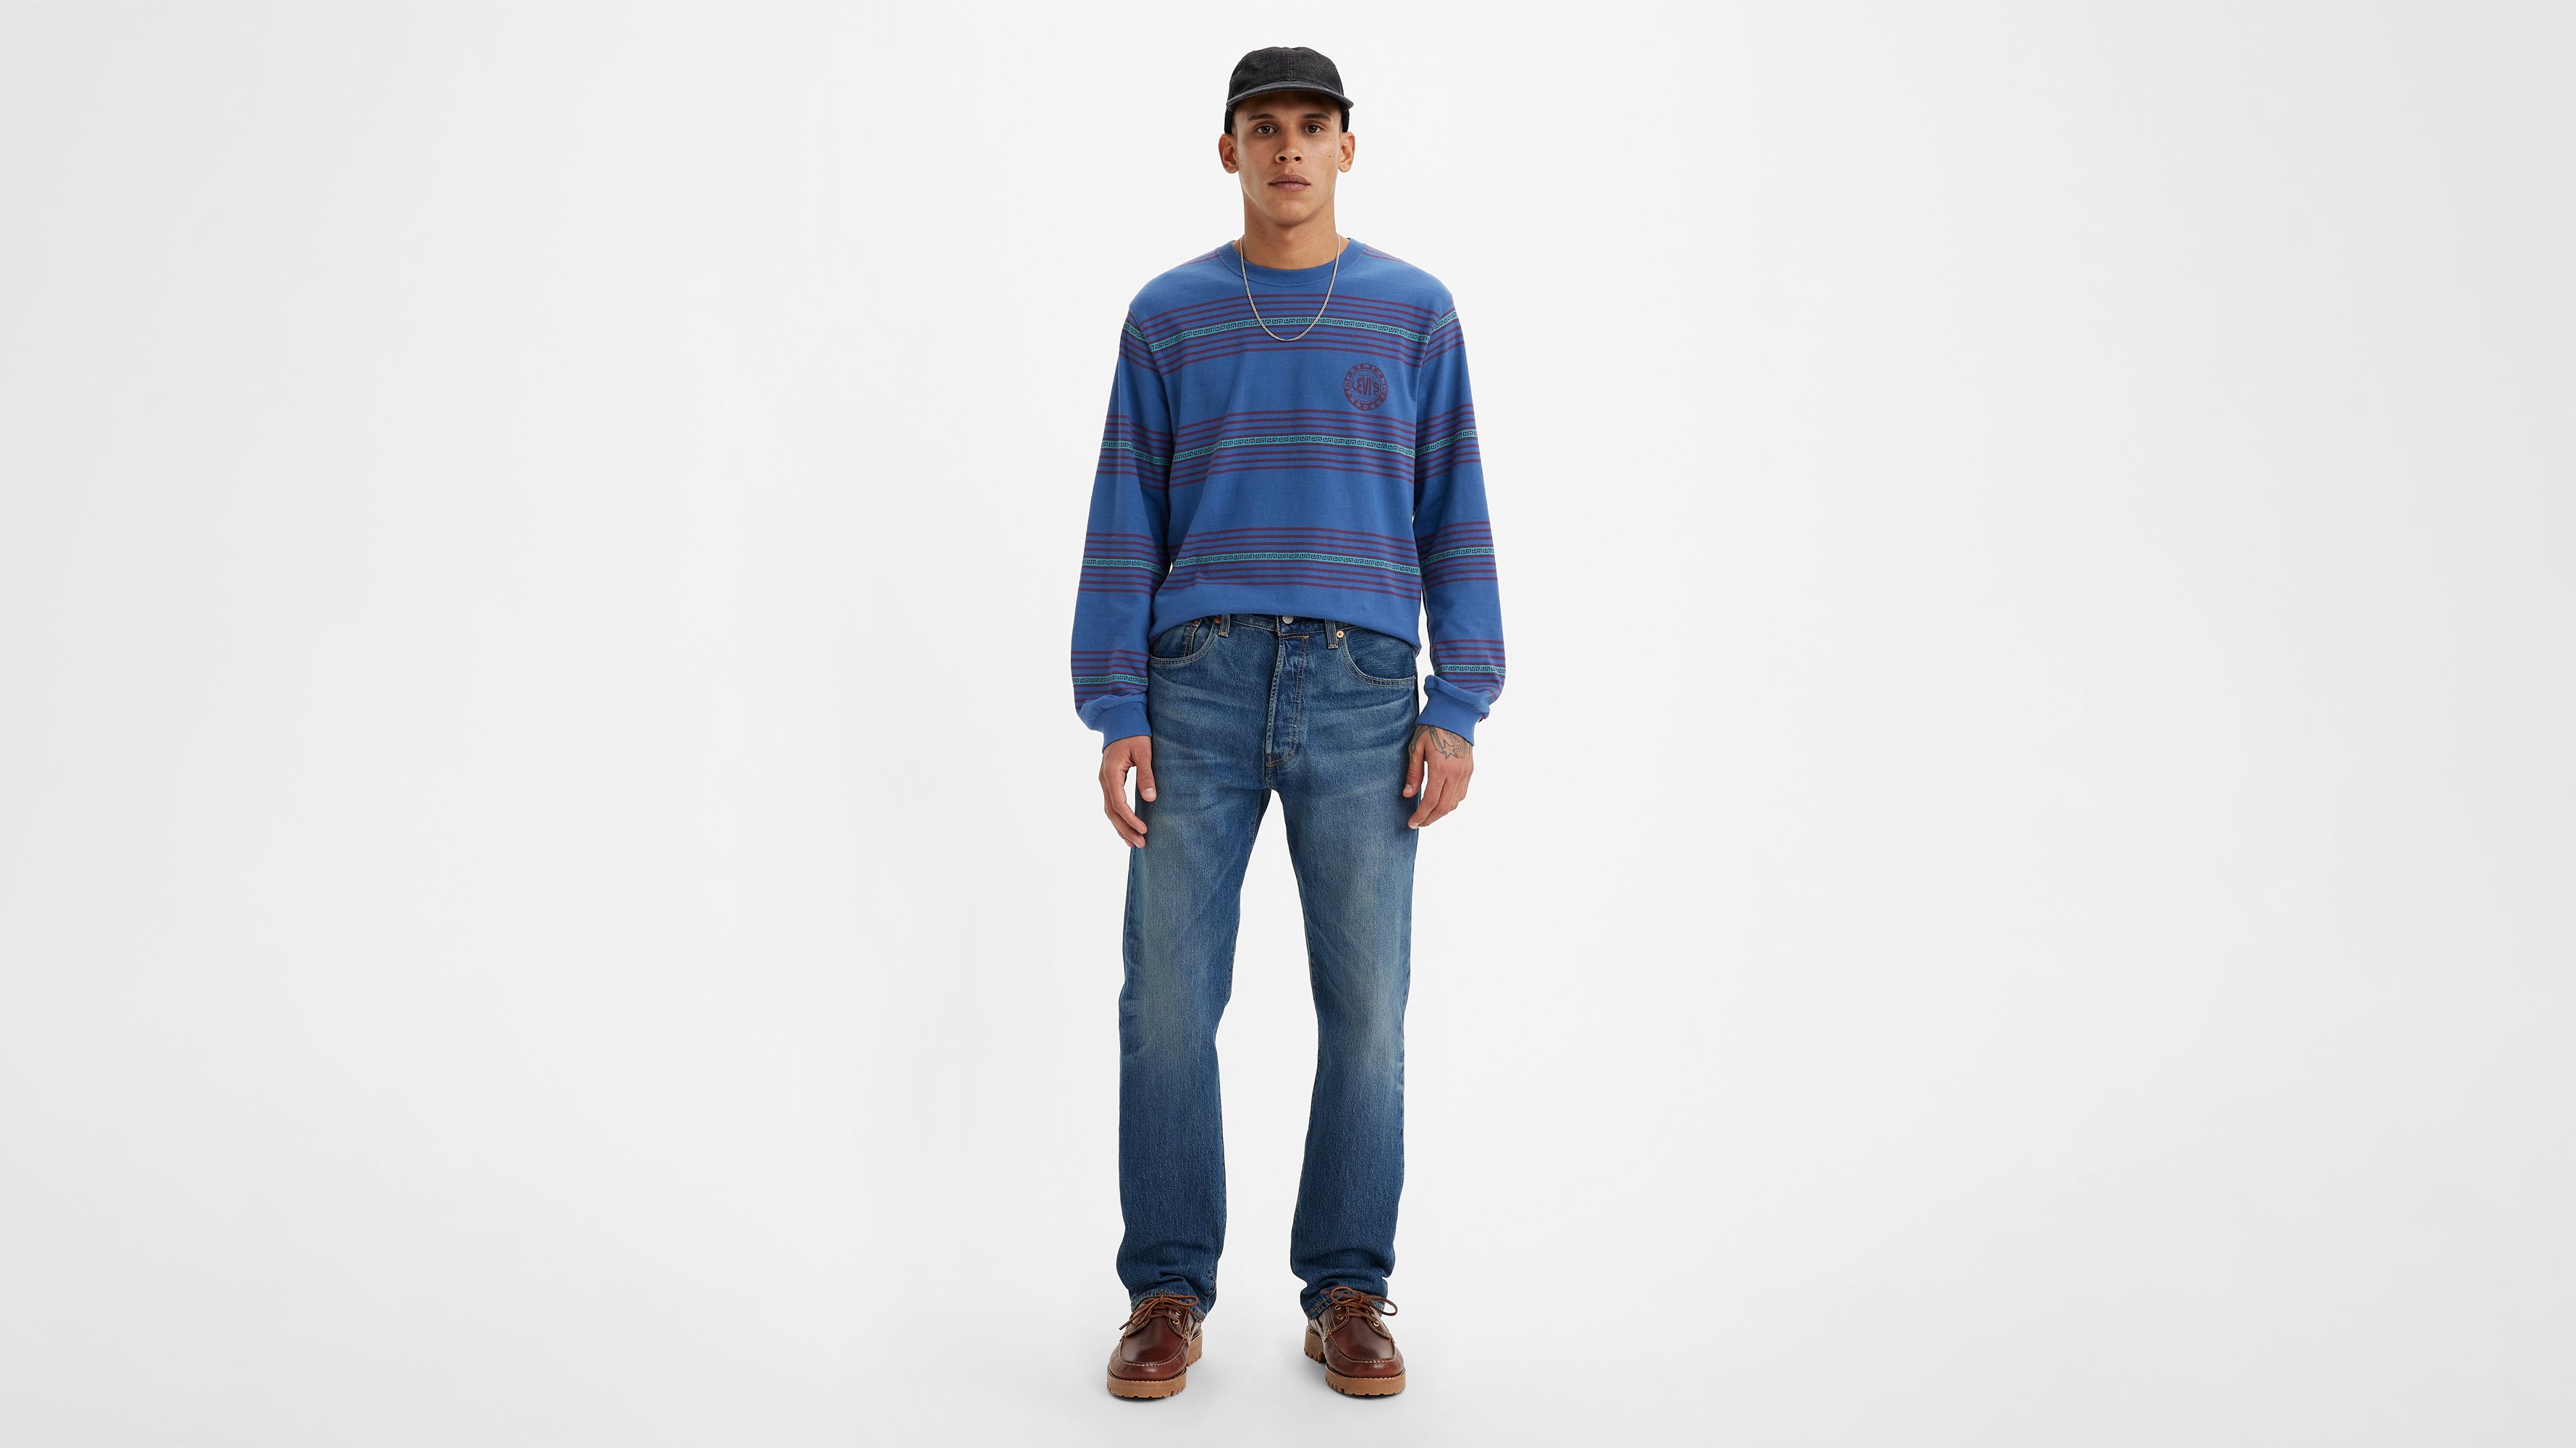 LEGO Group x Levi's® 501® '93 Straight Fit Men's Jeans